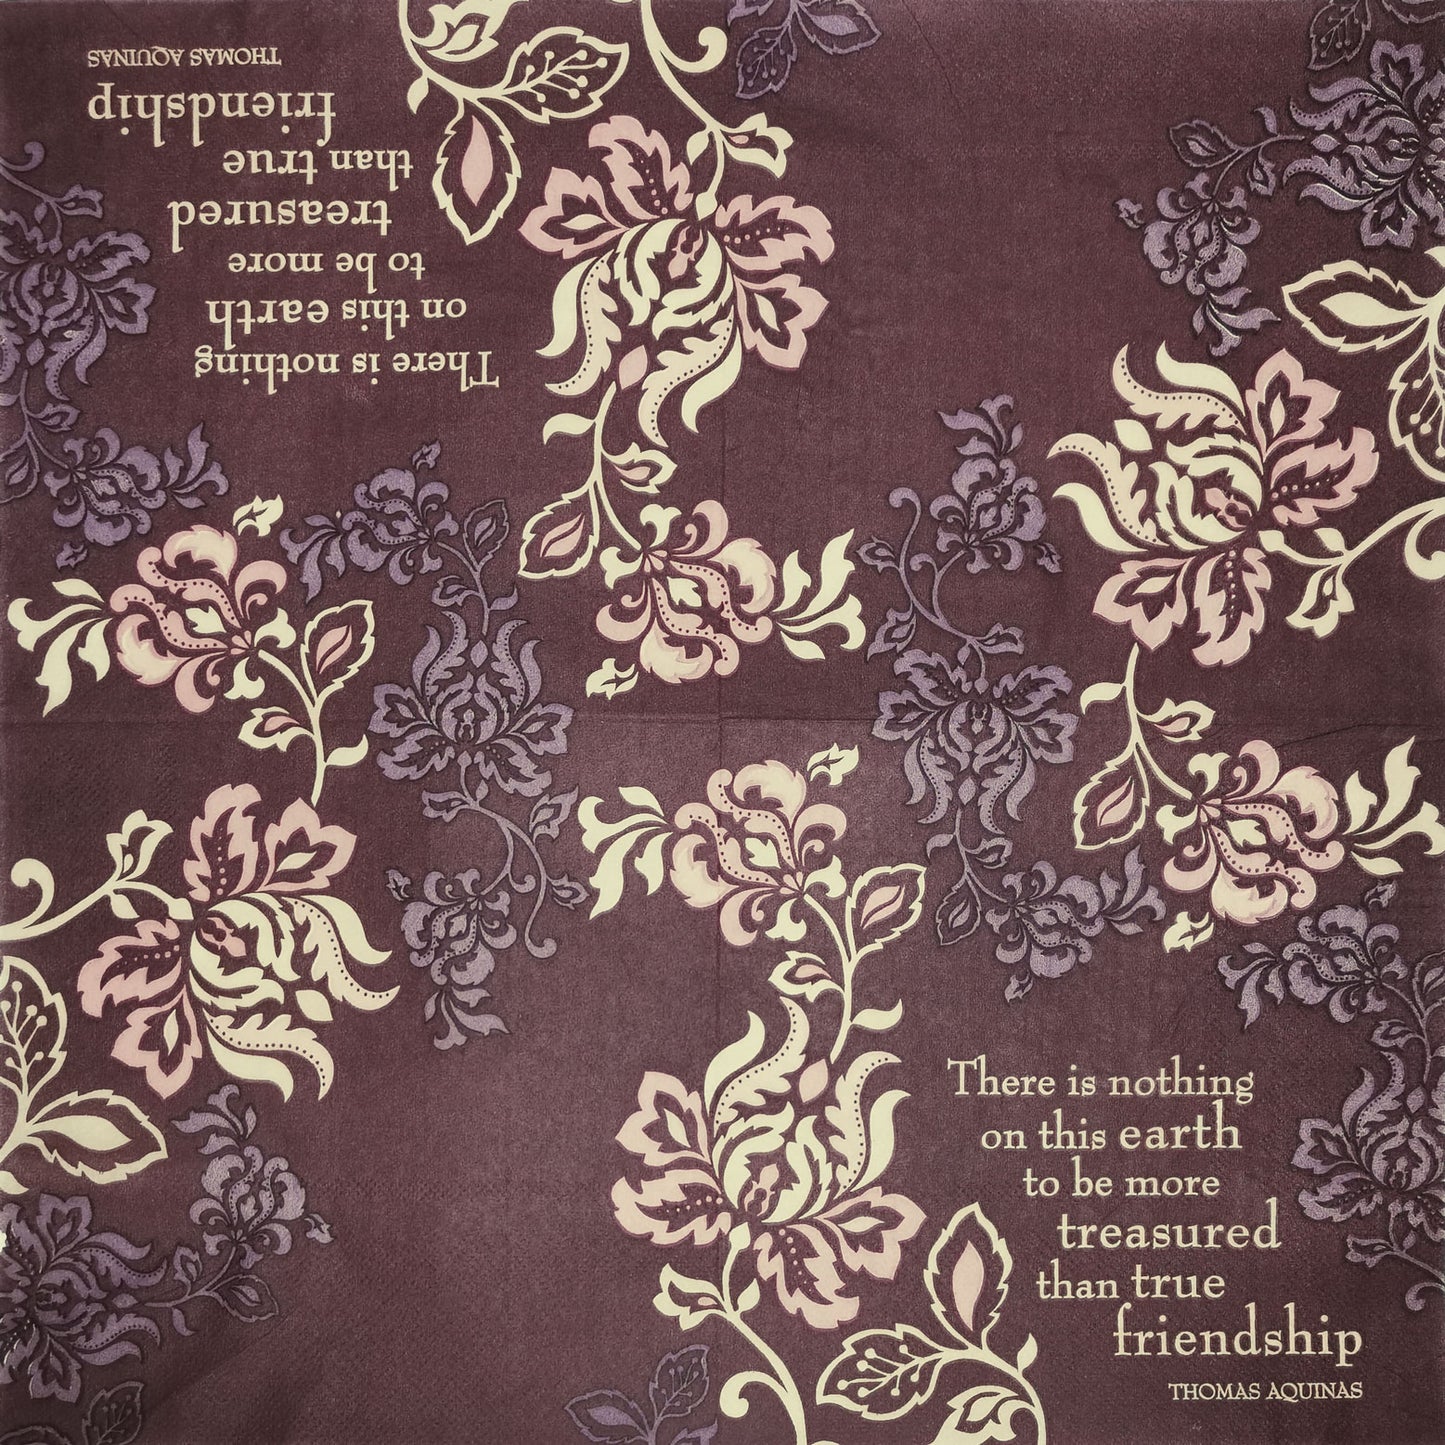 Friendship Paper Luncheon Napkins in White - 20 Per Package